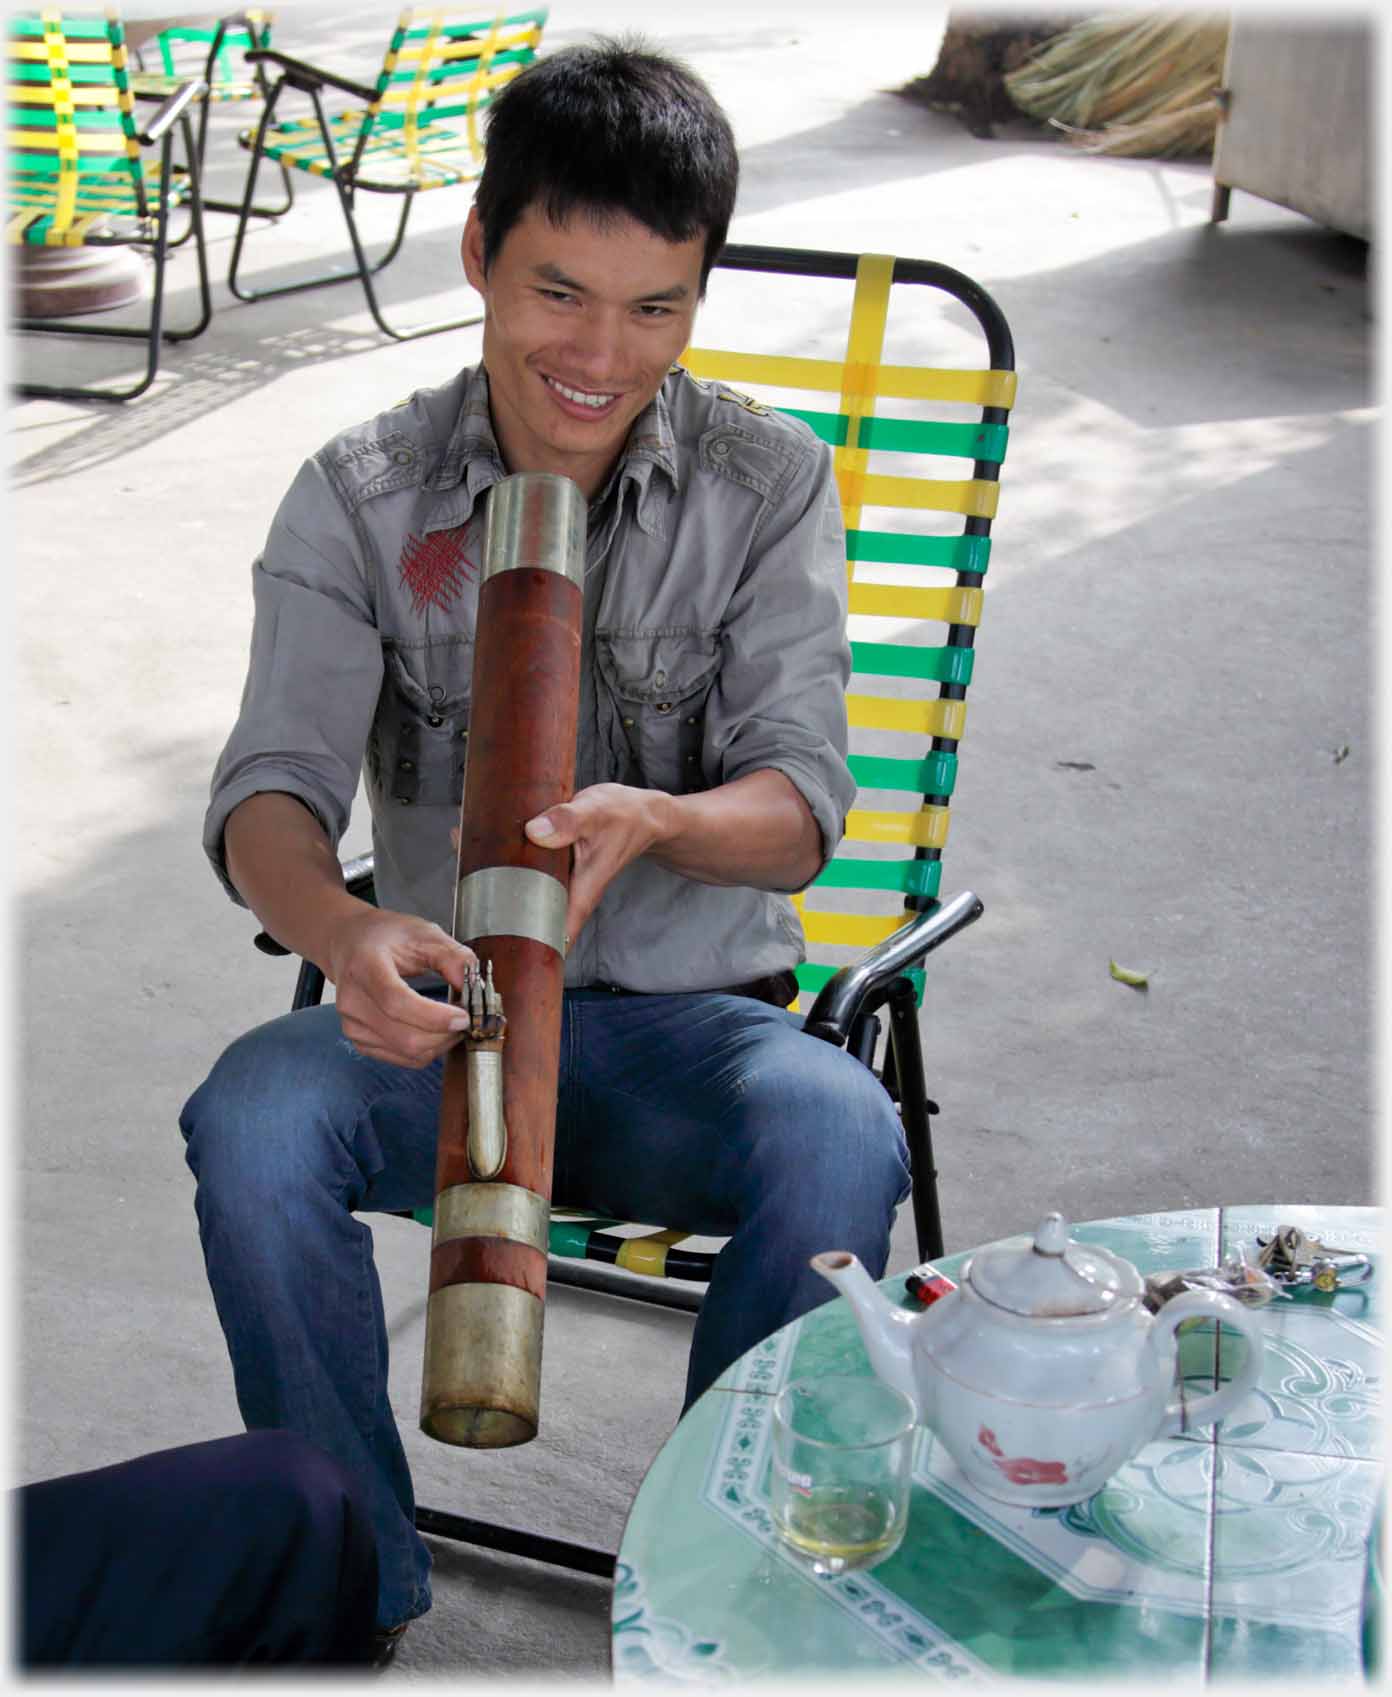 Han smiling as he lights a tobacco water pipe, tea on the table.